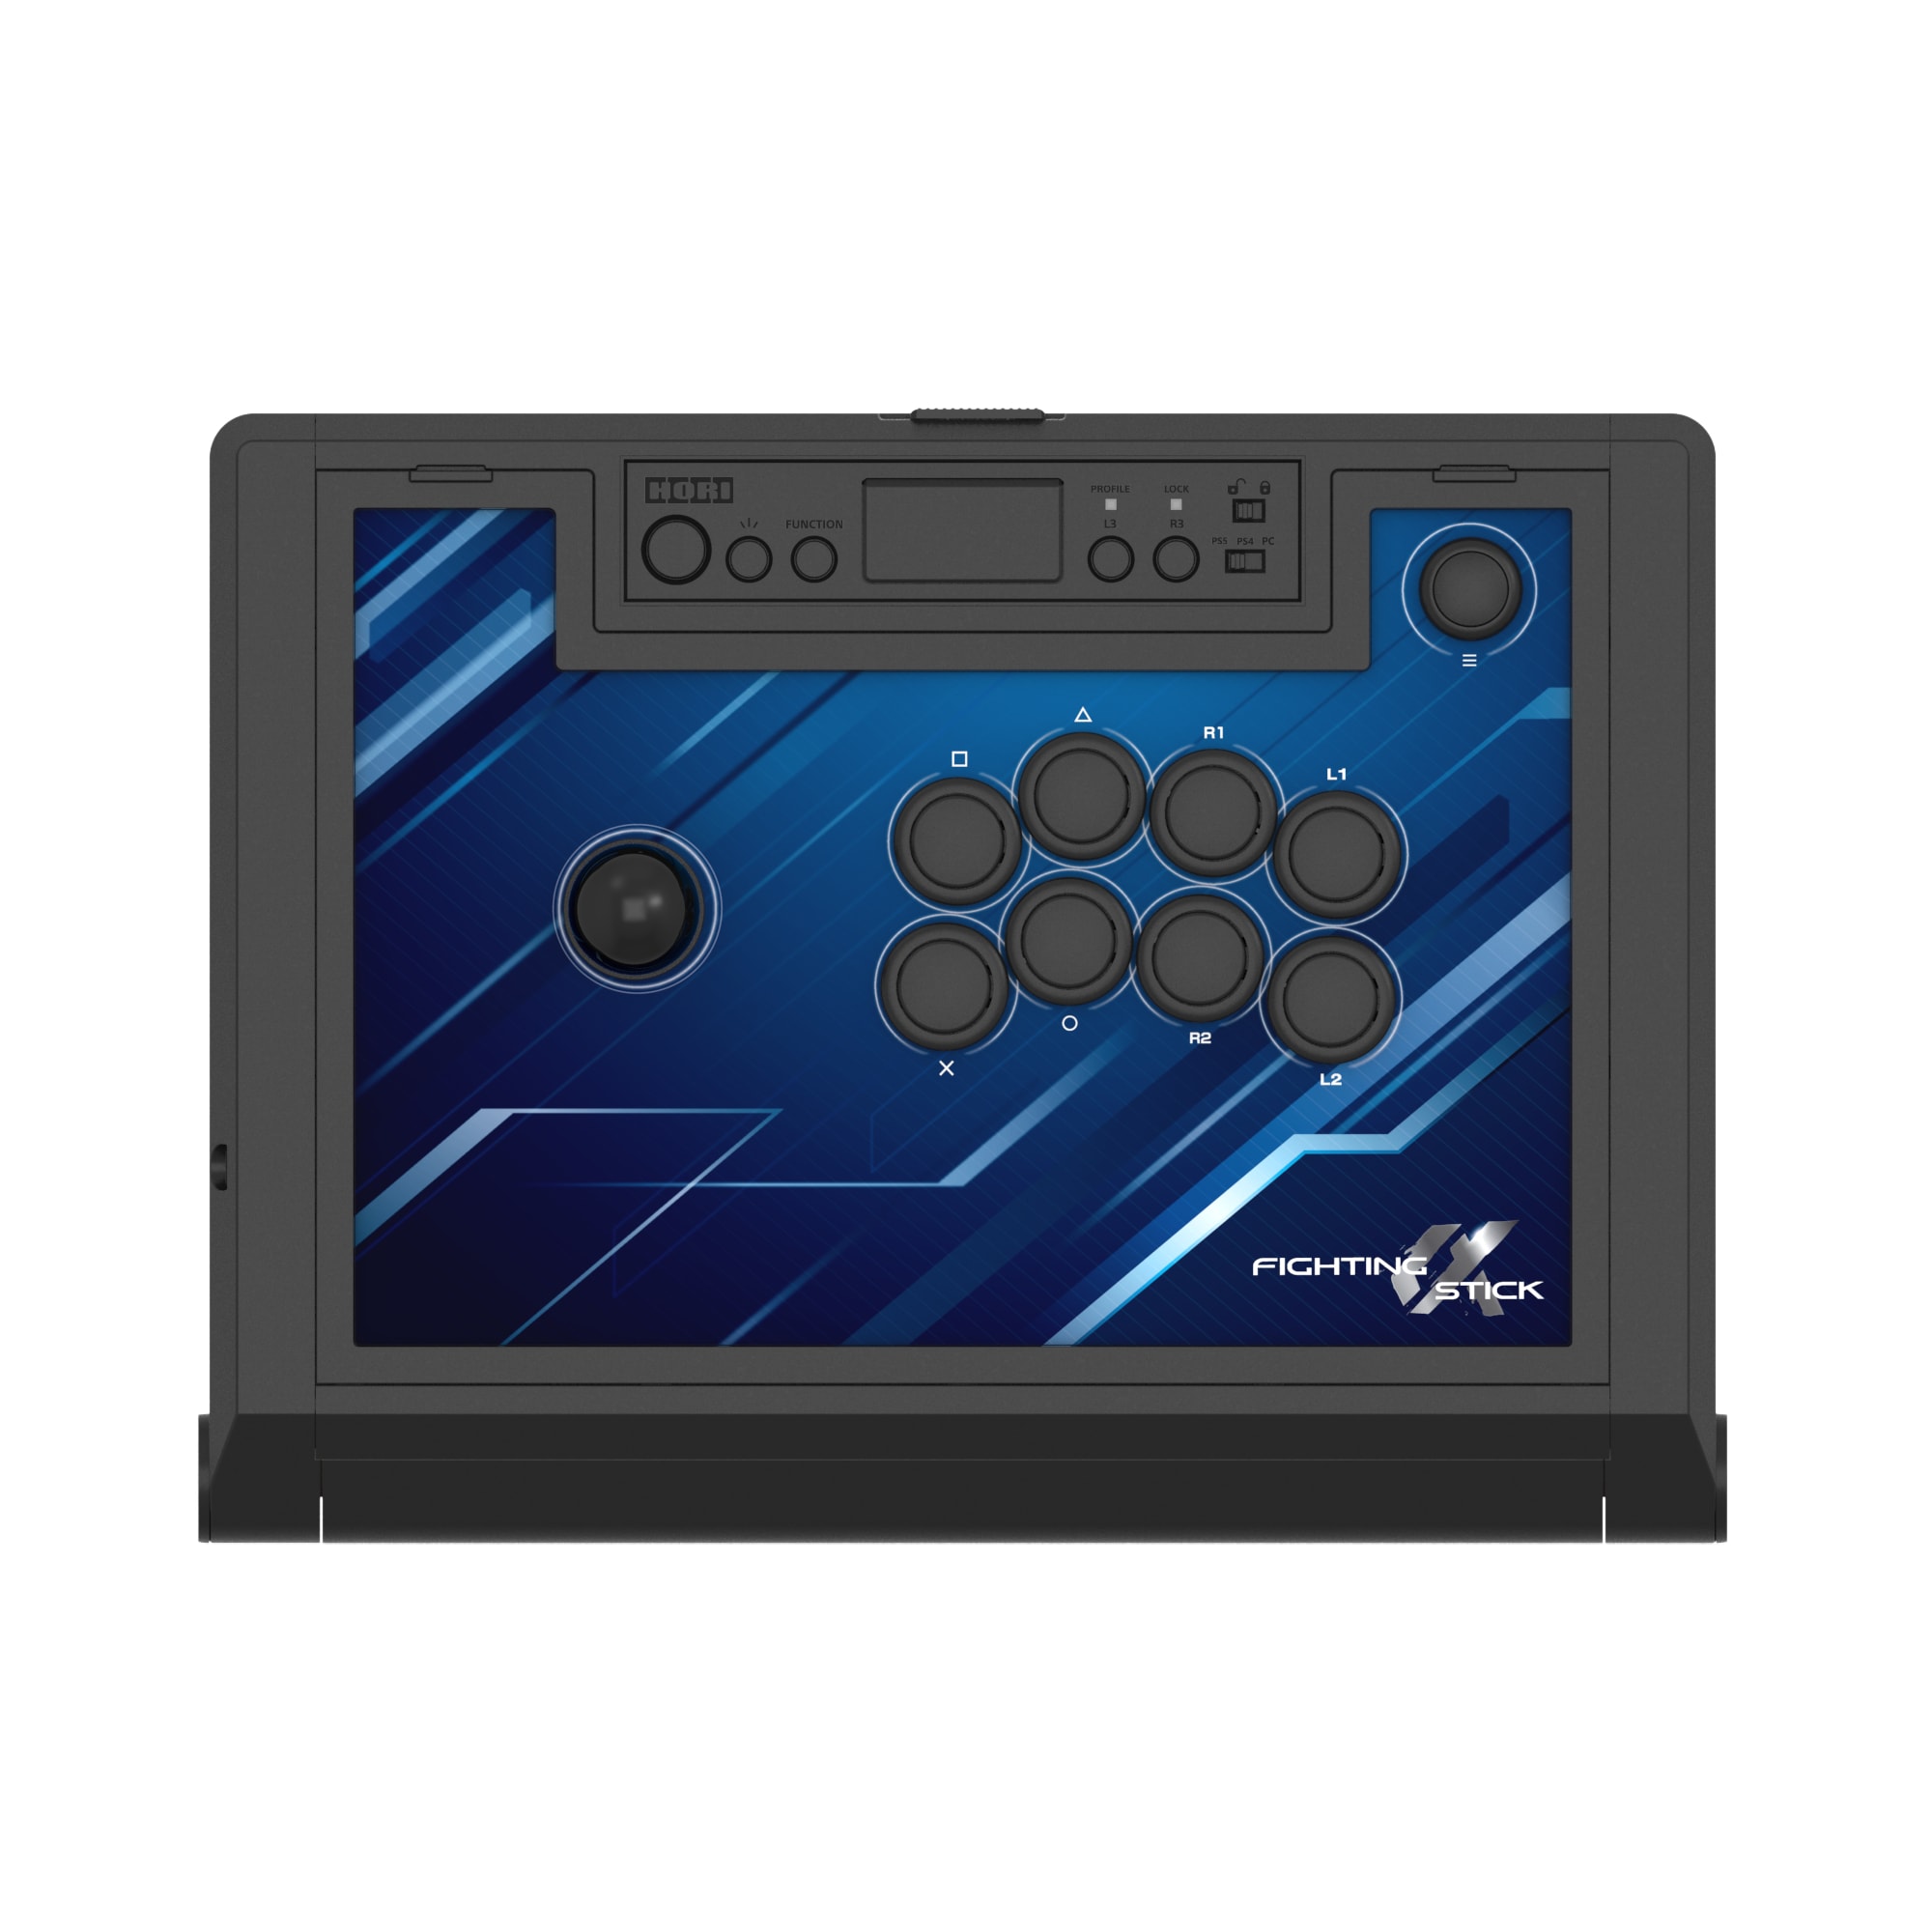 PlayStation-Controller »Fighting Stick Alpha«